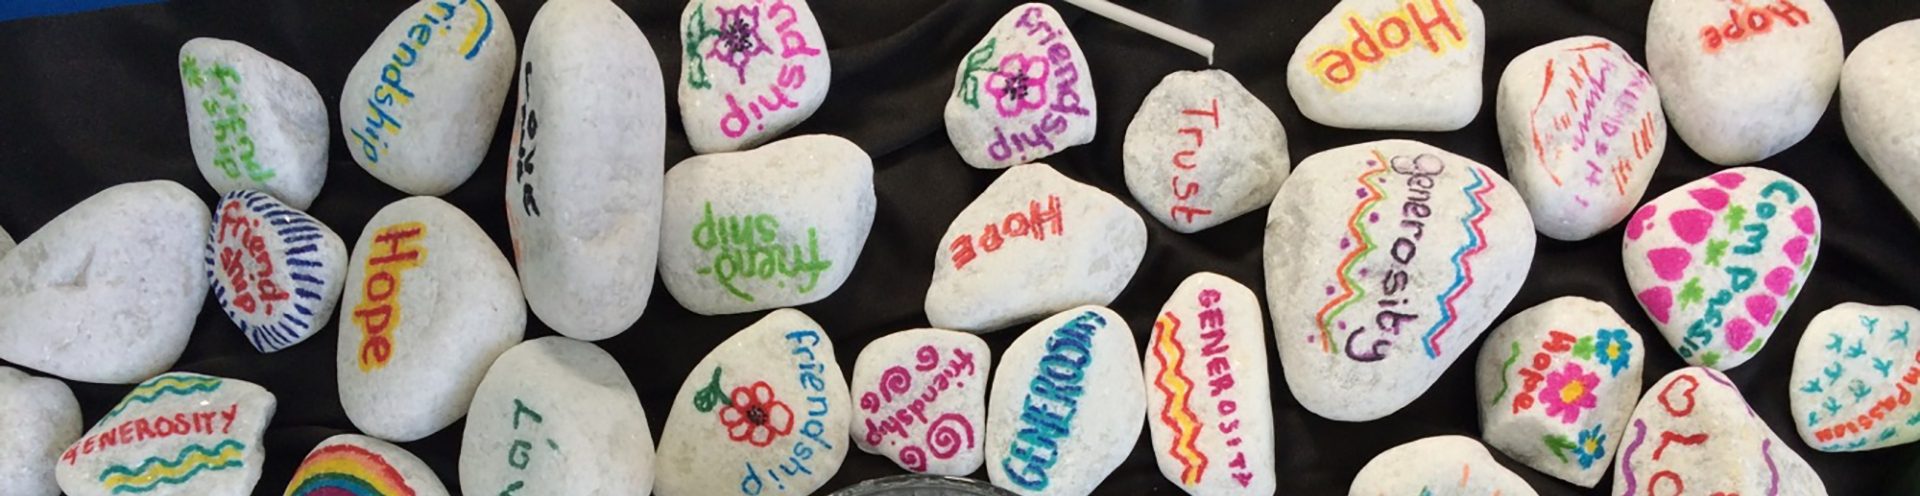 Beautiful stones with positive messages on a desk.